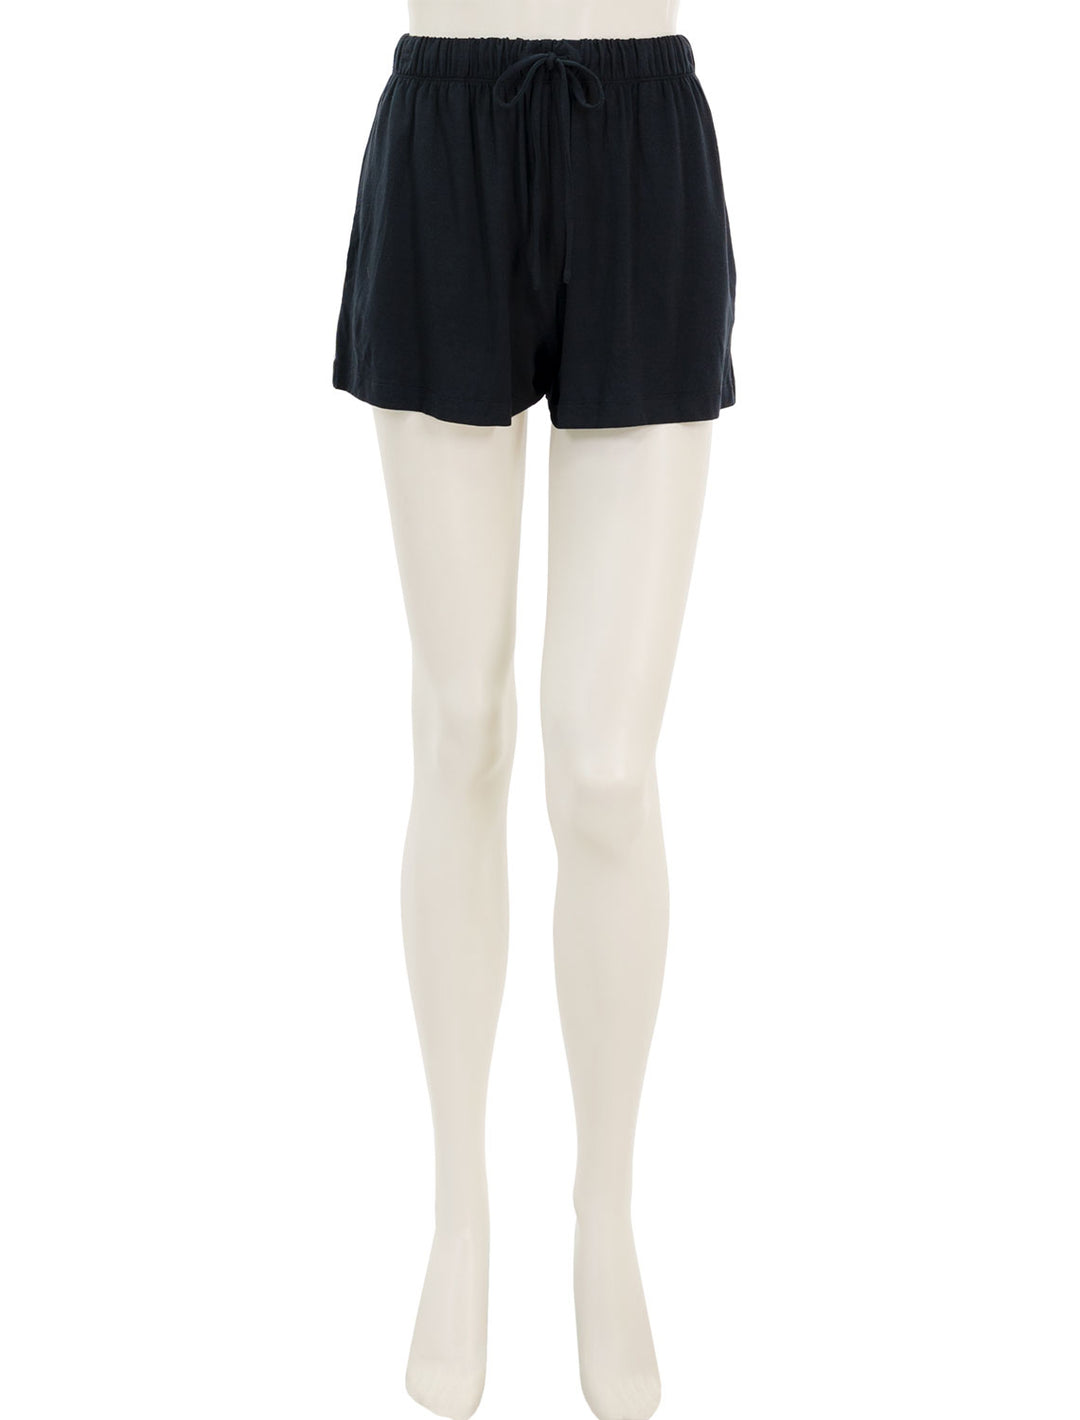 Front view of eberjey's gisele everyday relaxed short in black.